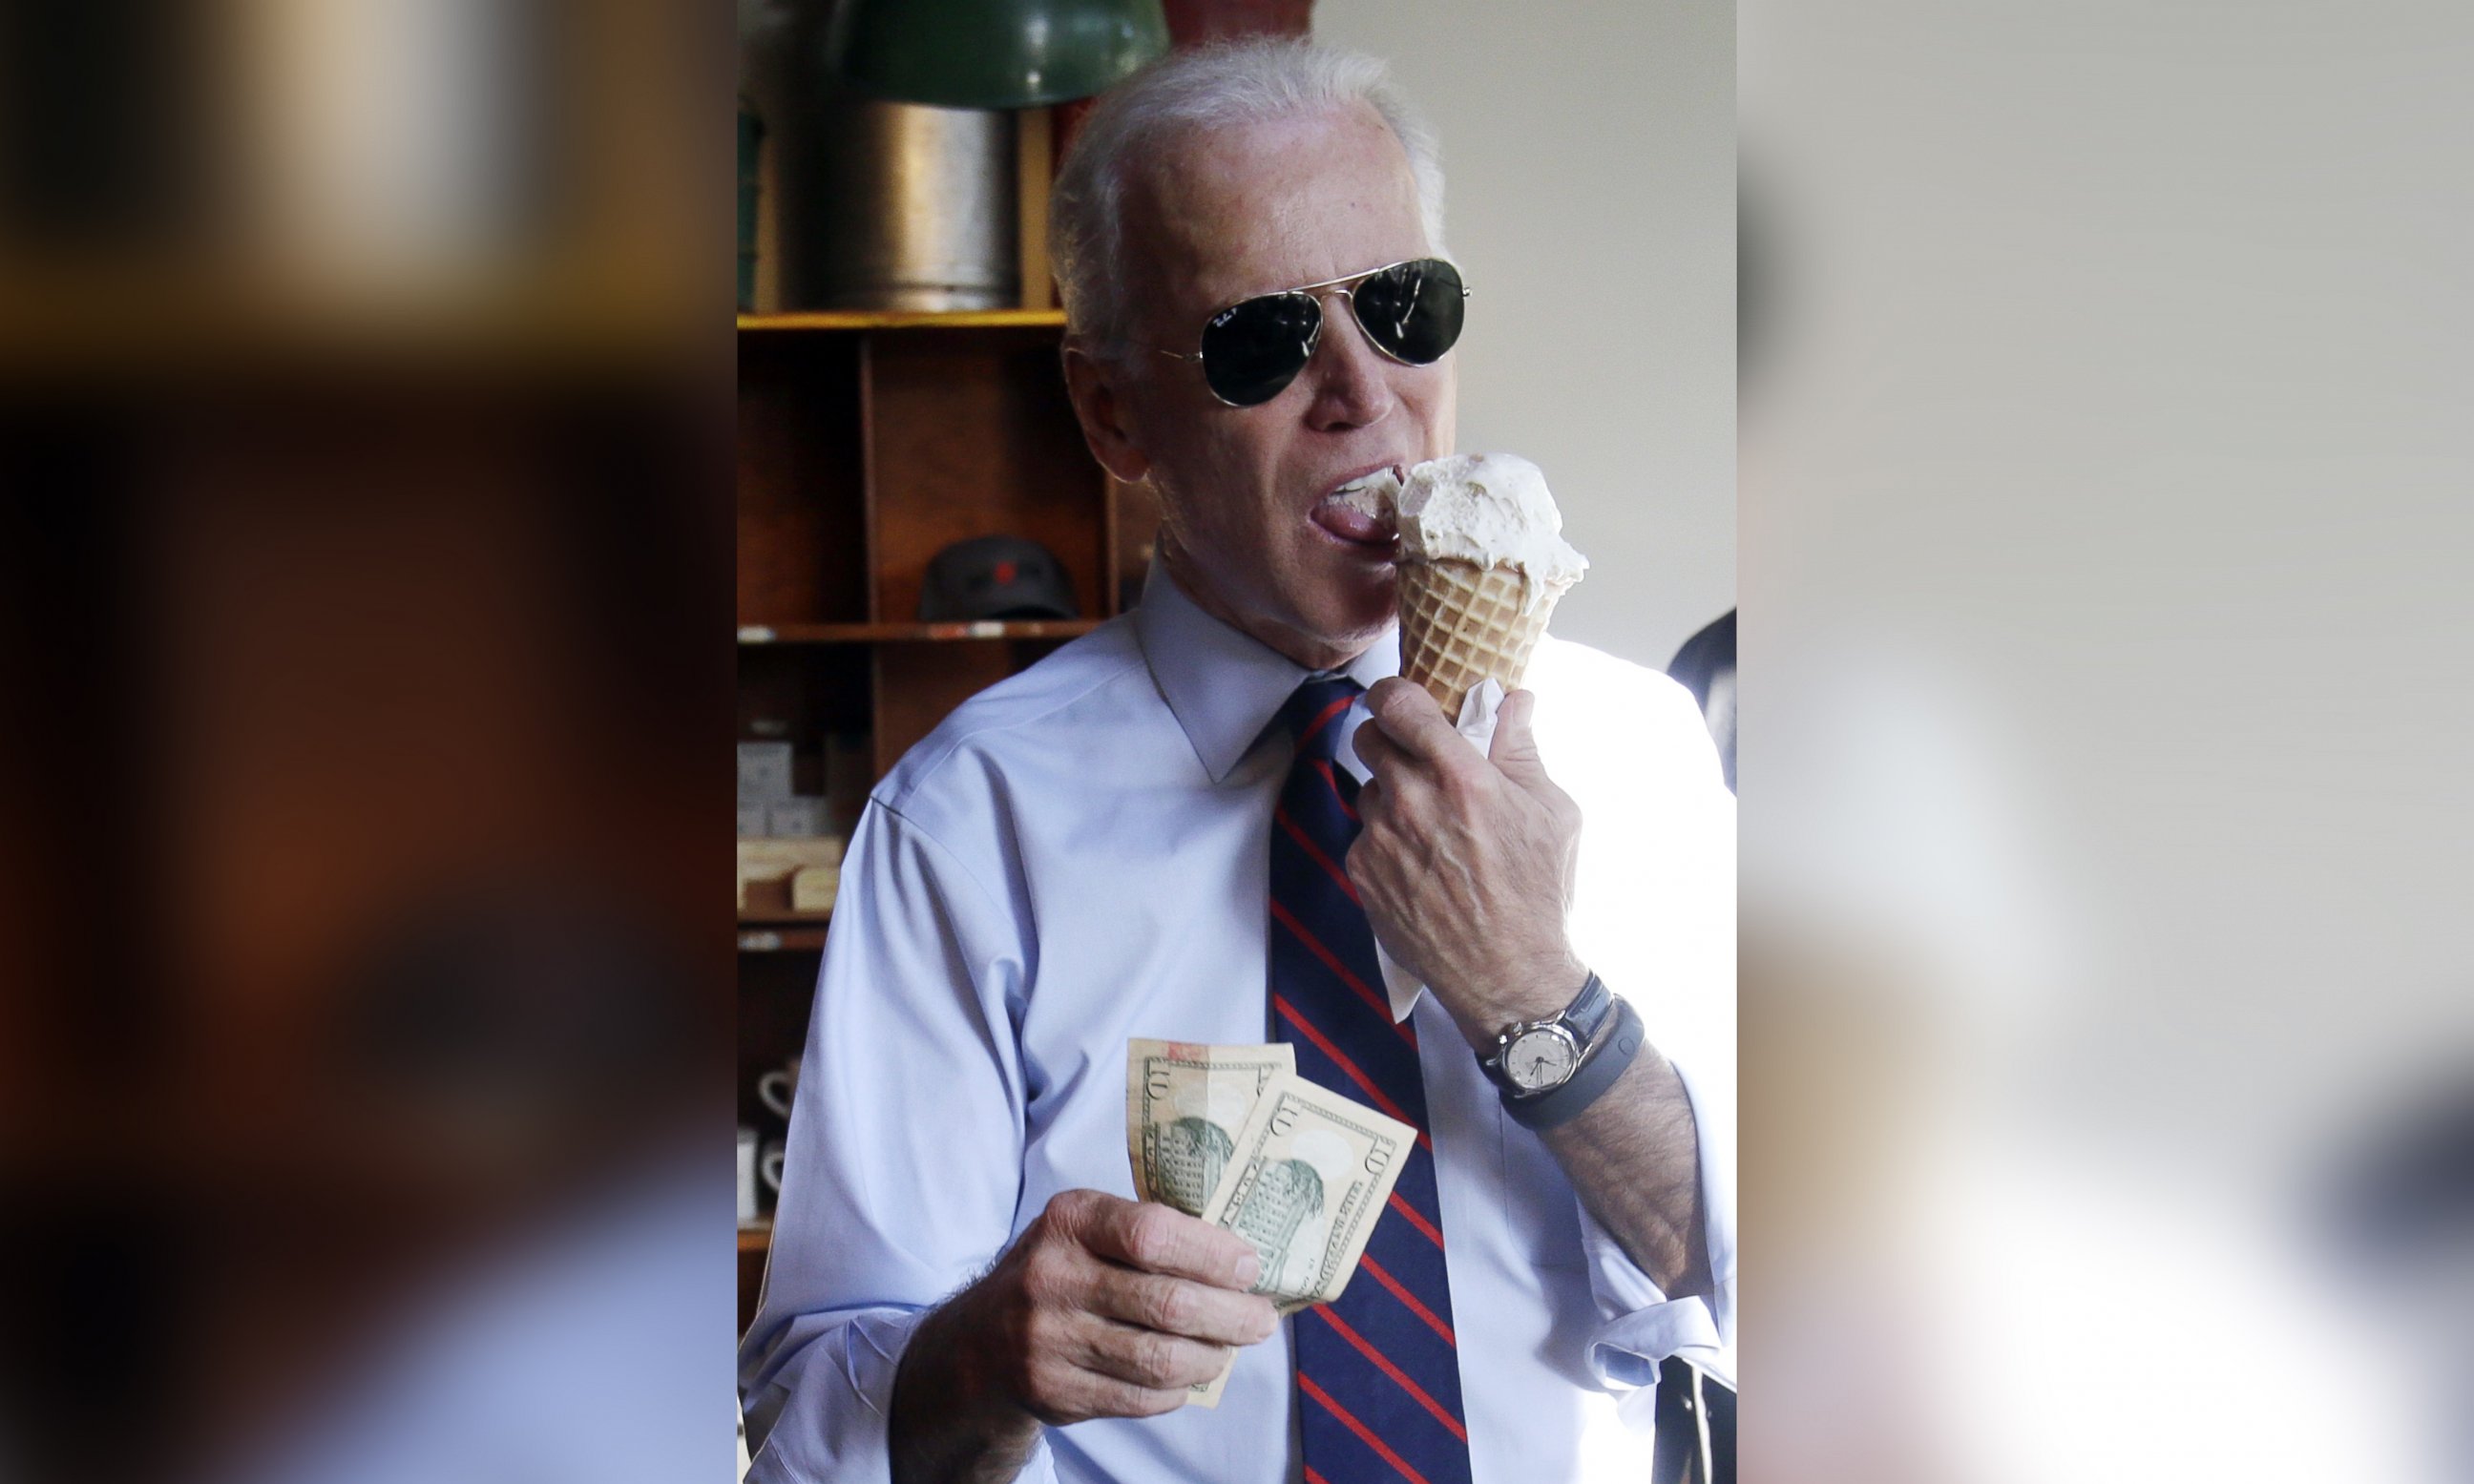 PHOTO: Vice President Joe Biden gets ready to pay for an ice cream cone after a campaign rally for U.S. Sen. Jeff Merkley in Portland, Ore., Oct. 8, 2014.